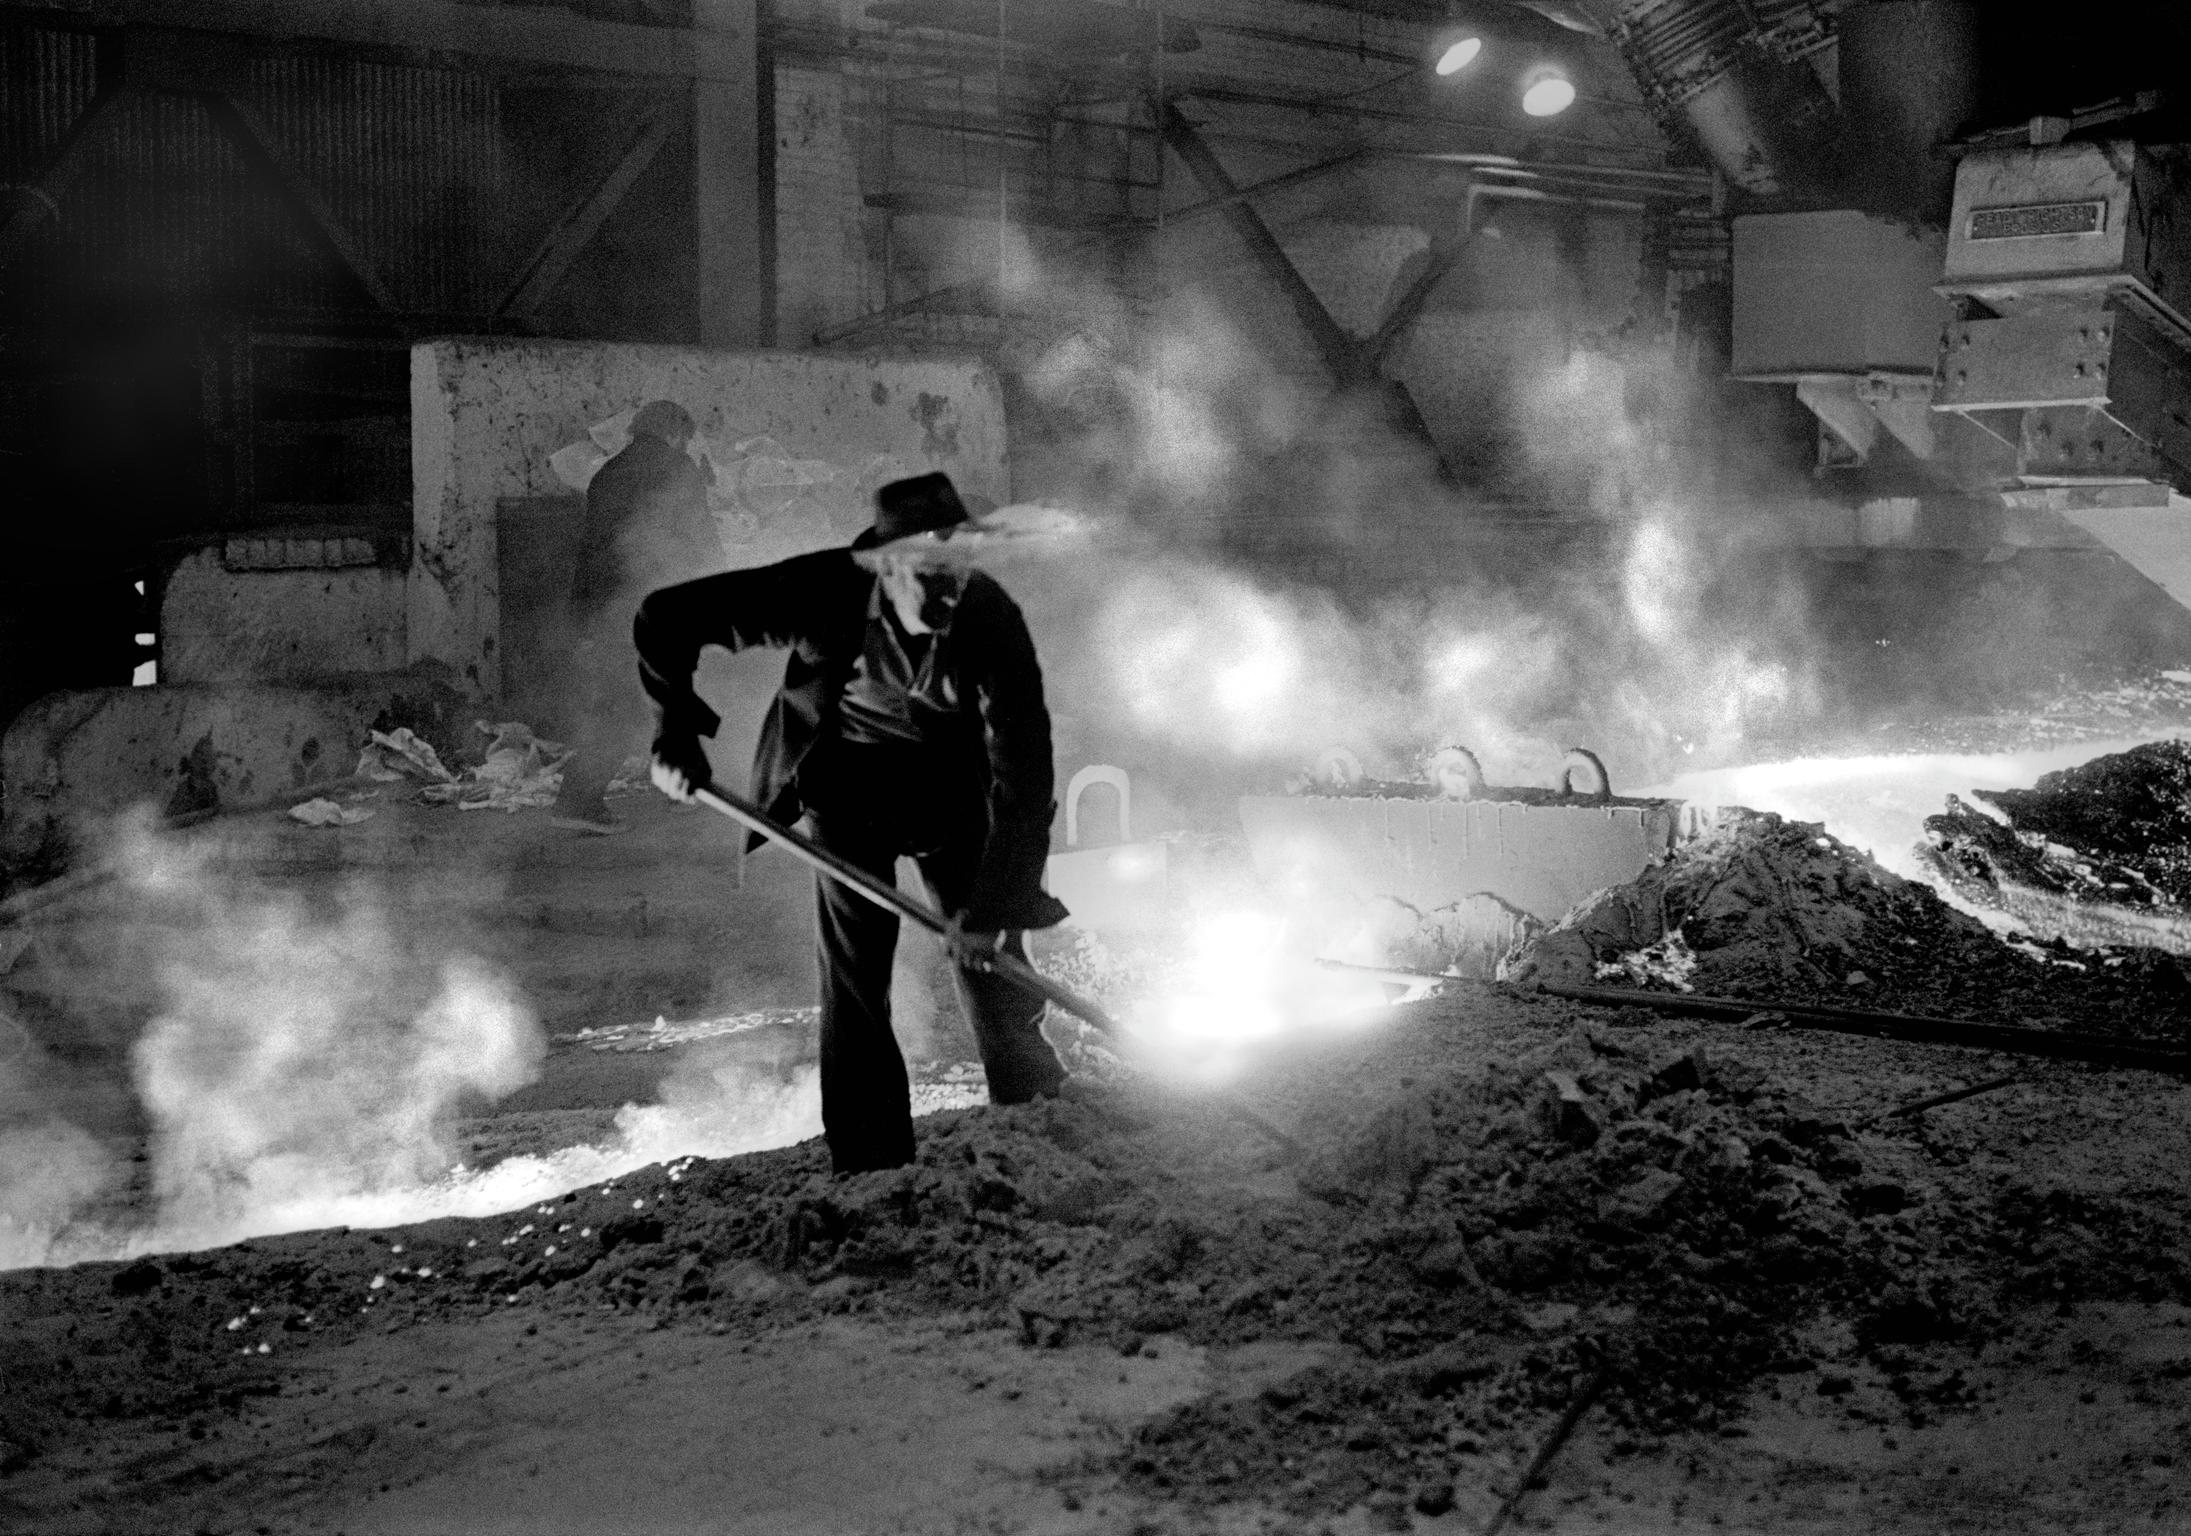 Working in Shotton Steel Works during its last few days before closing. Shotton, Wales